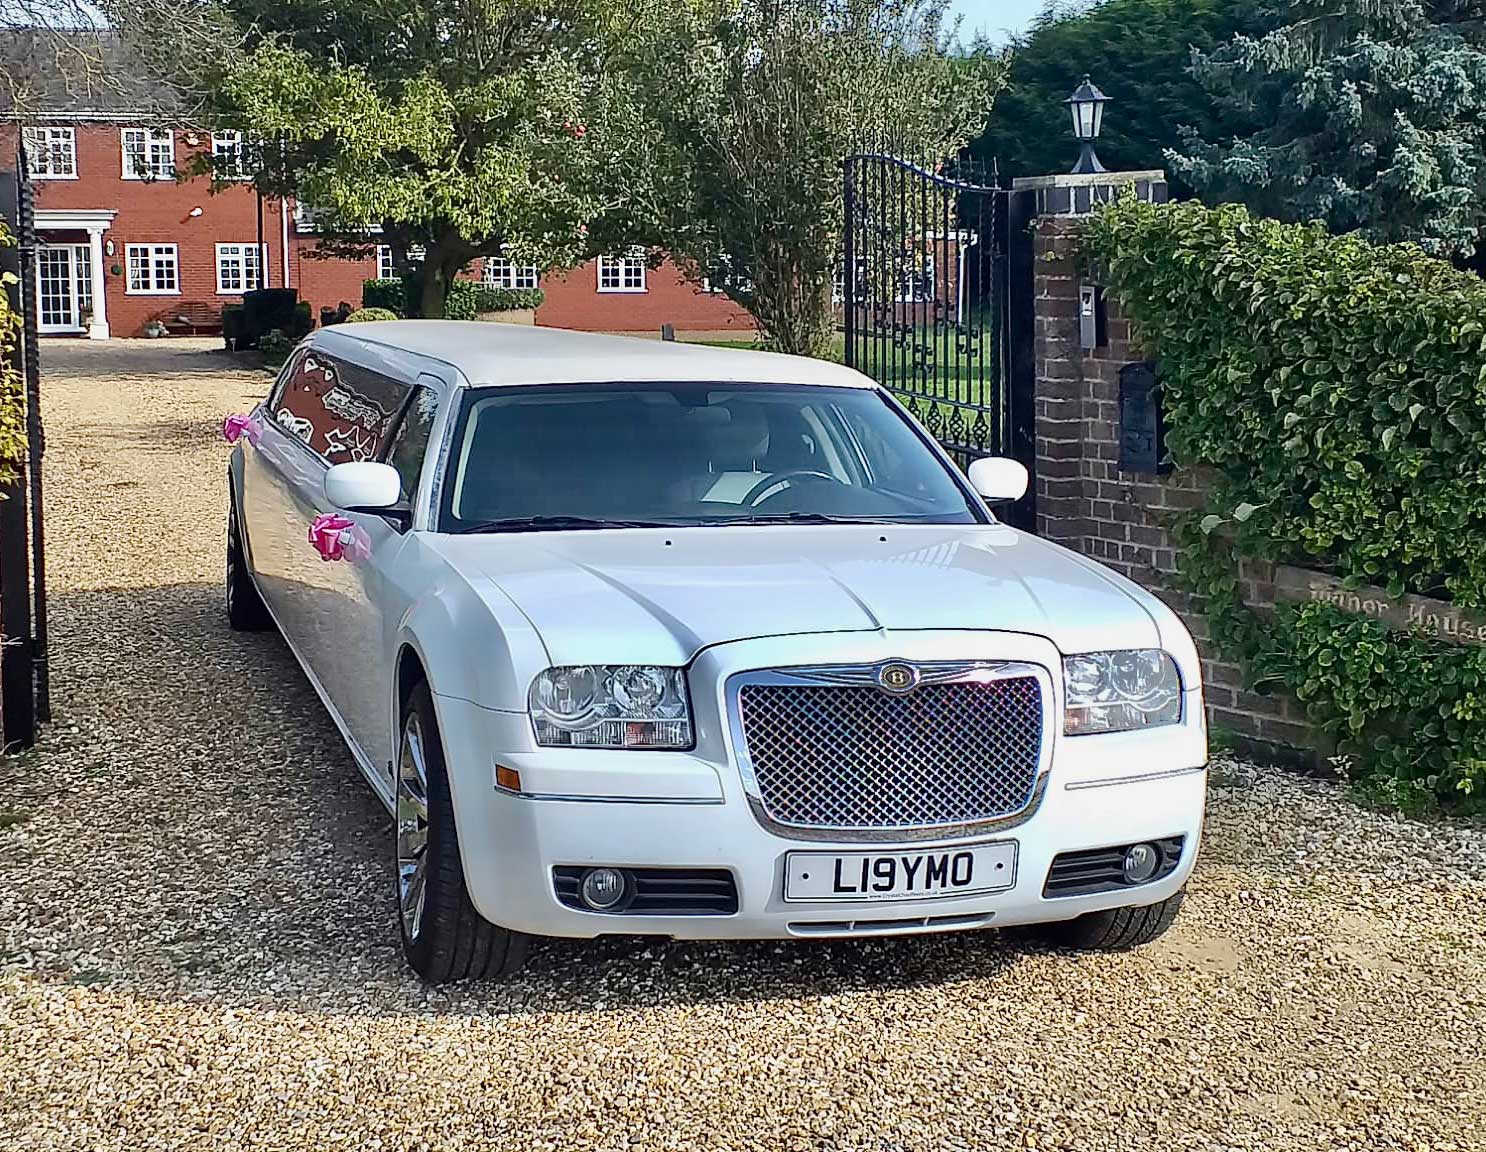 Wedding Limo Hire In Peterborough